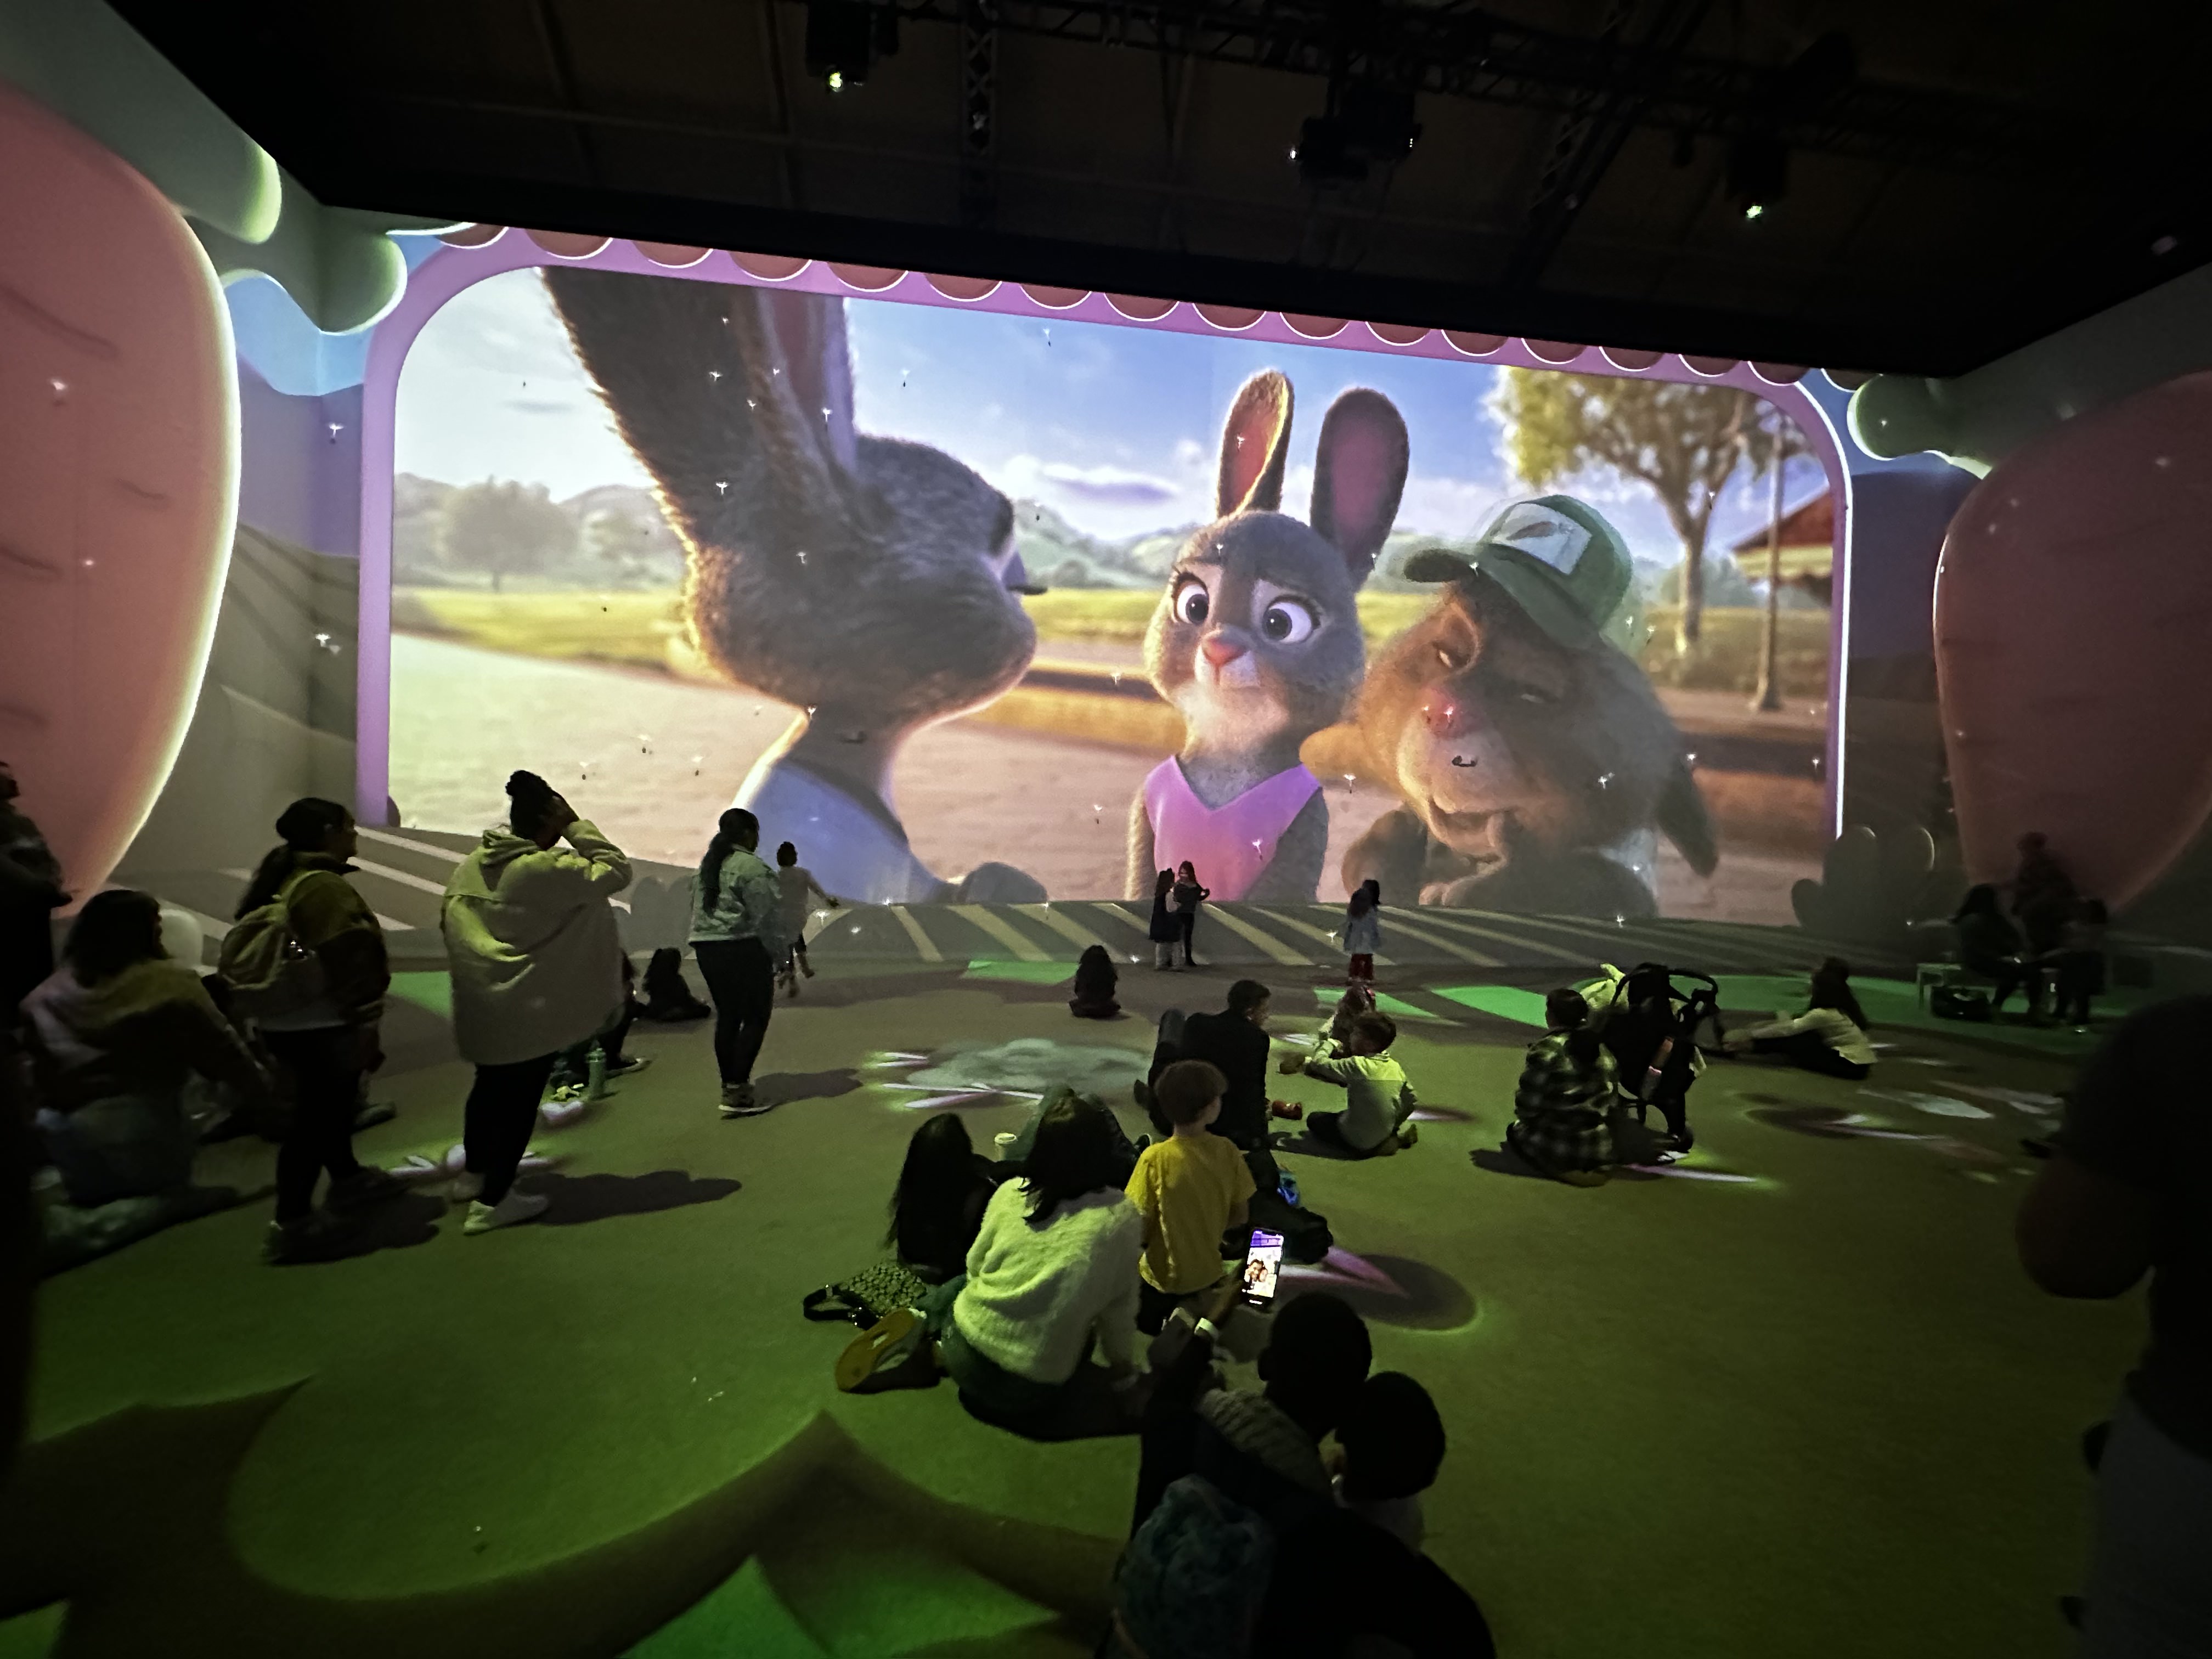 New Disney immersive experience surrounds Boston visitors with movie magic  